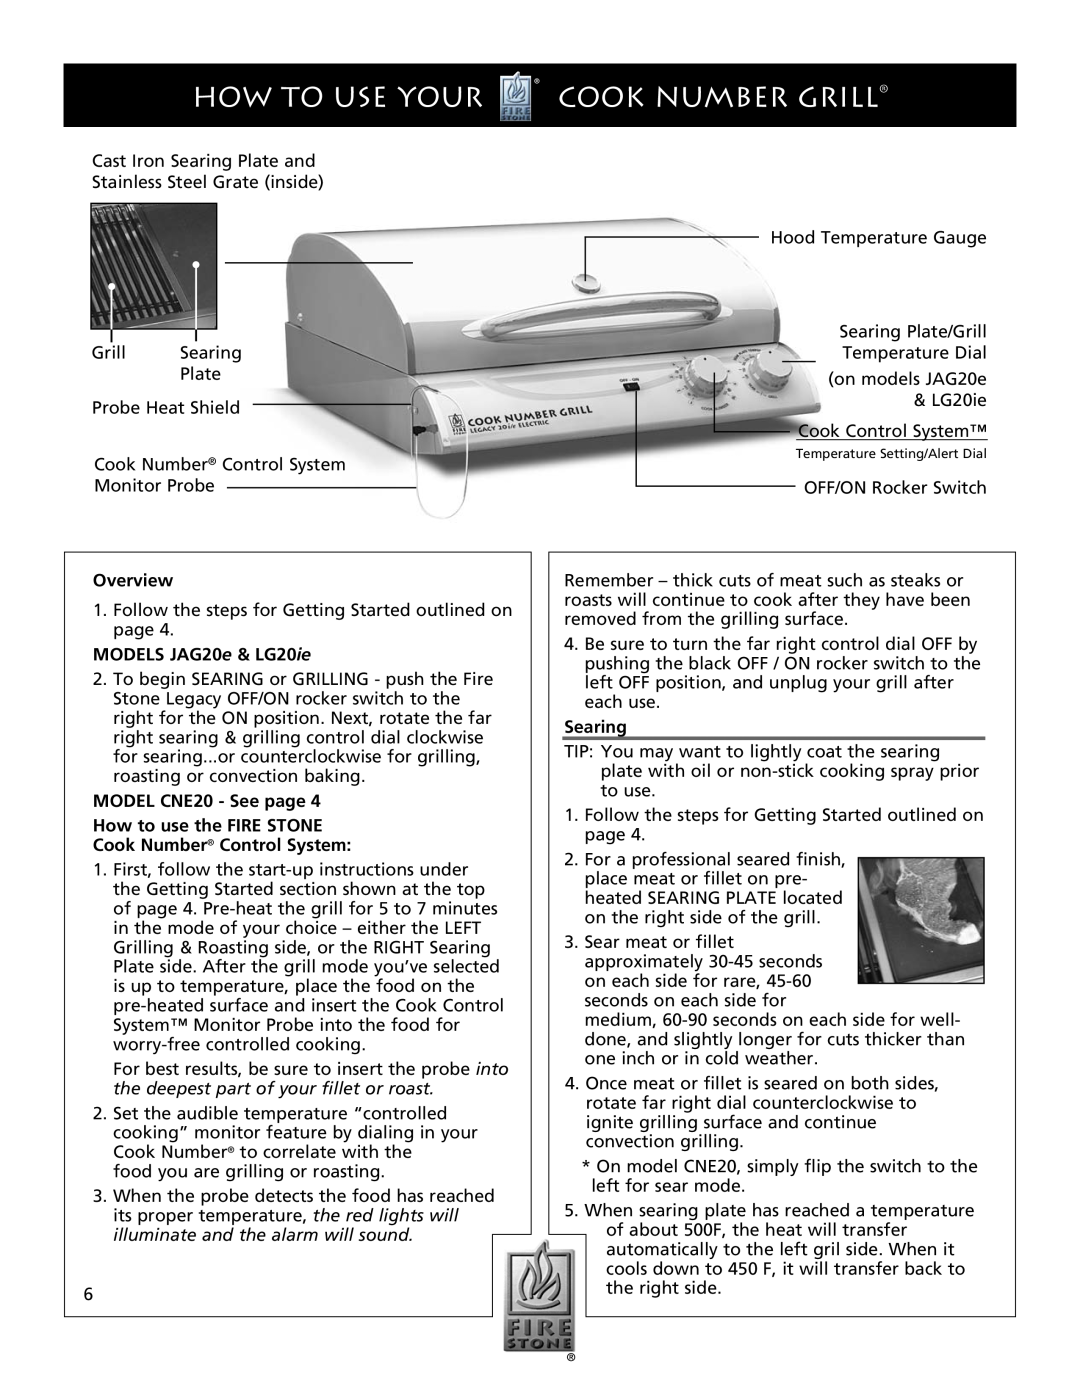 Dual CNE20 How To Use Your, Cook Number Grill, Overview, MODELS JAG20e & LG20ie, Cook Number Control System, Searing 